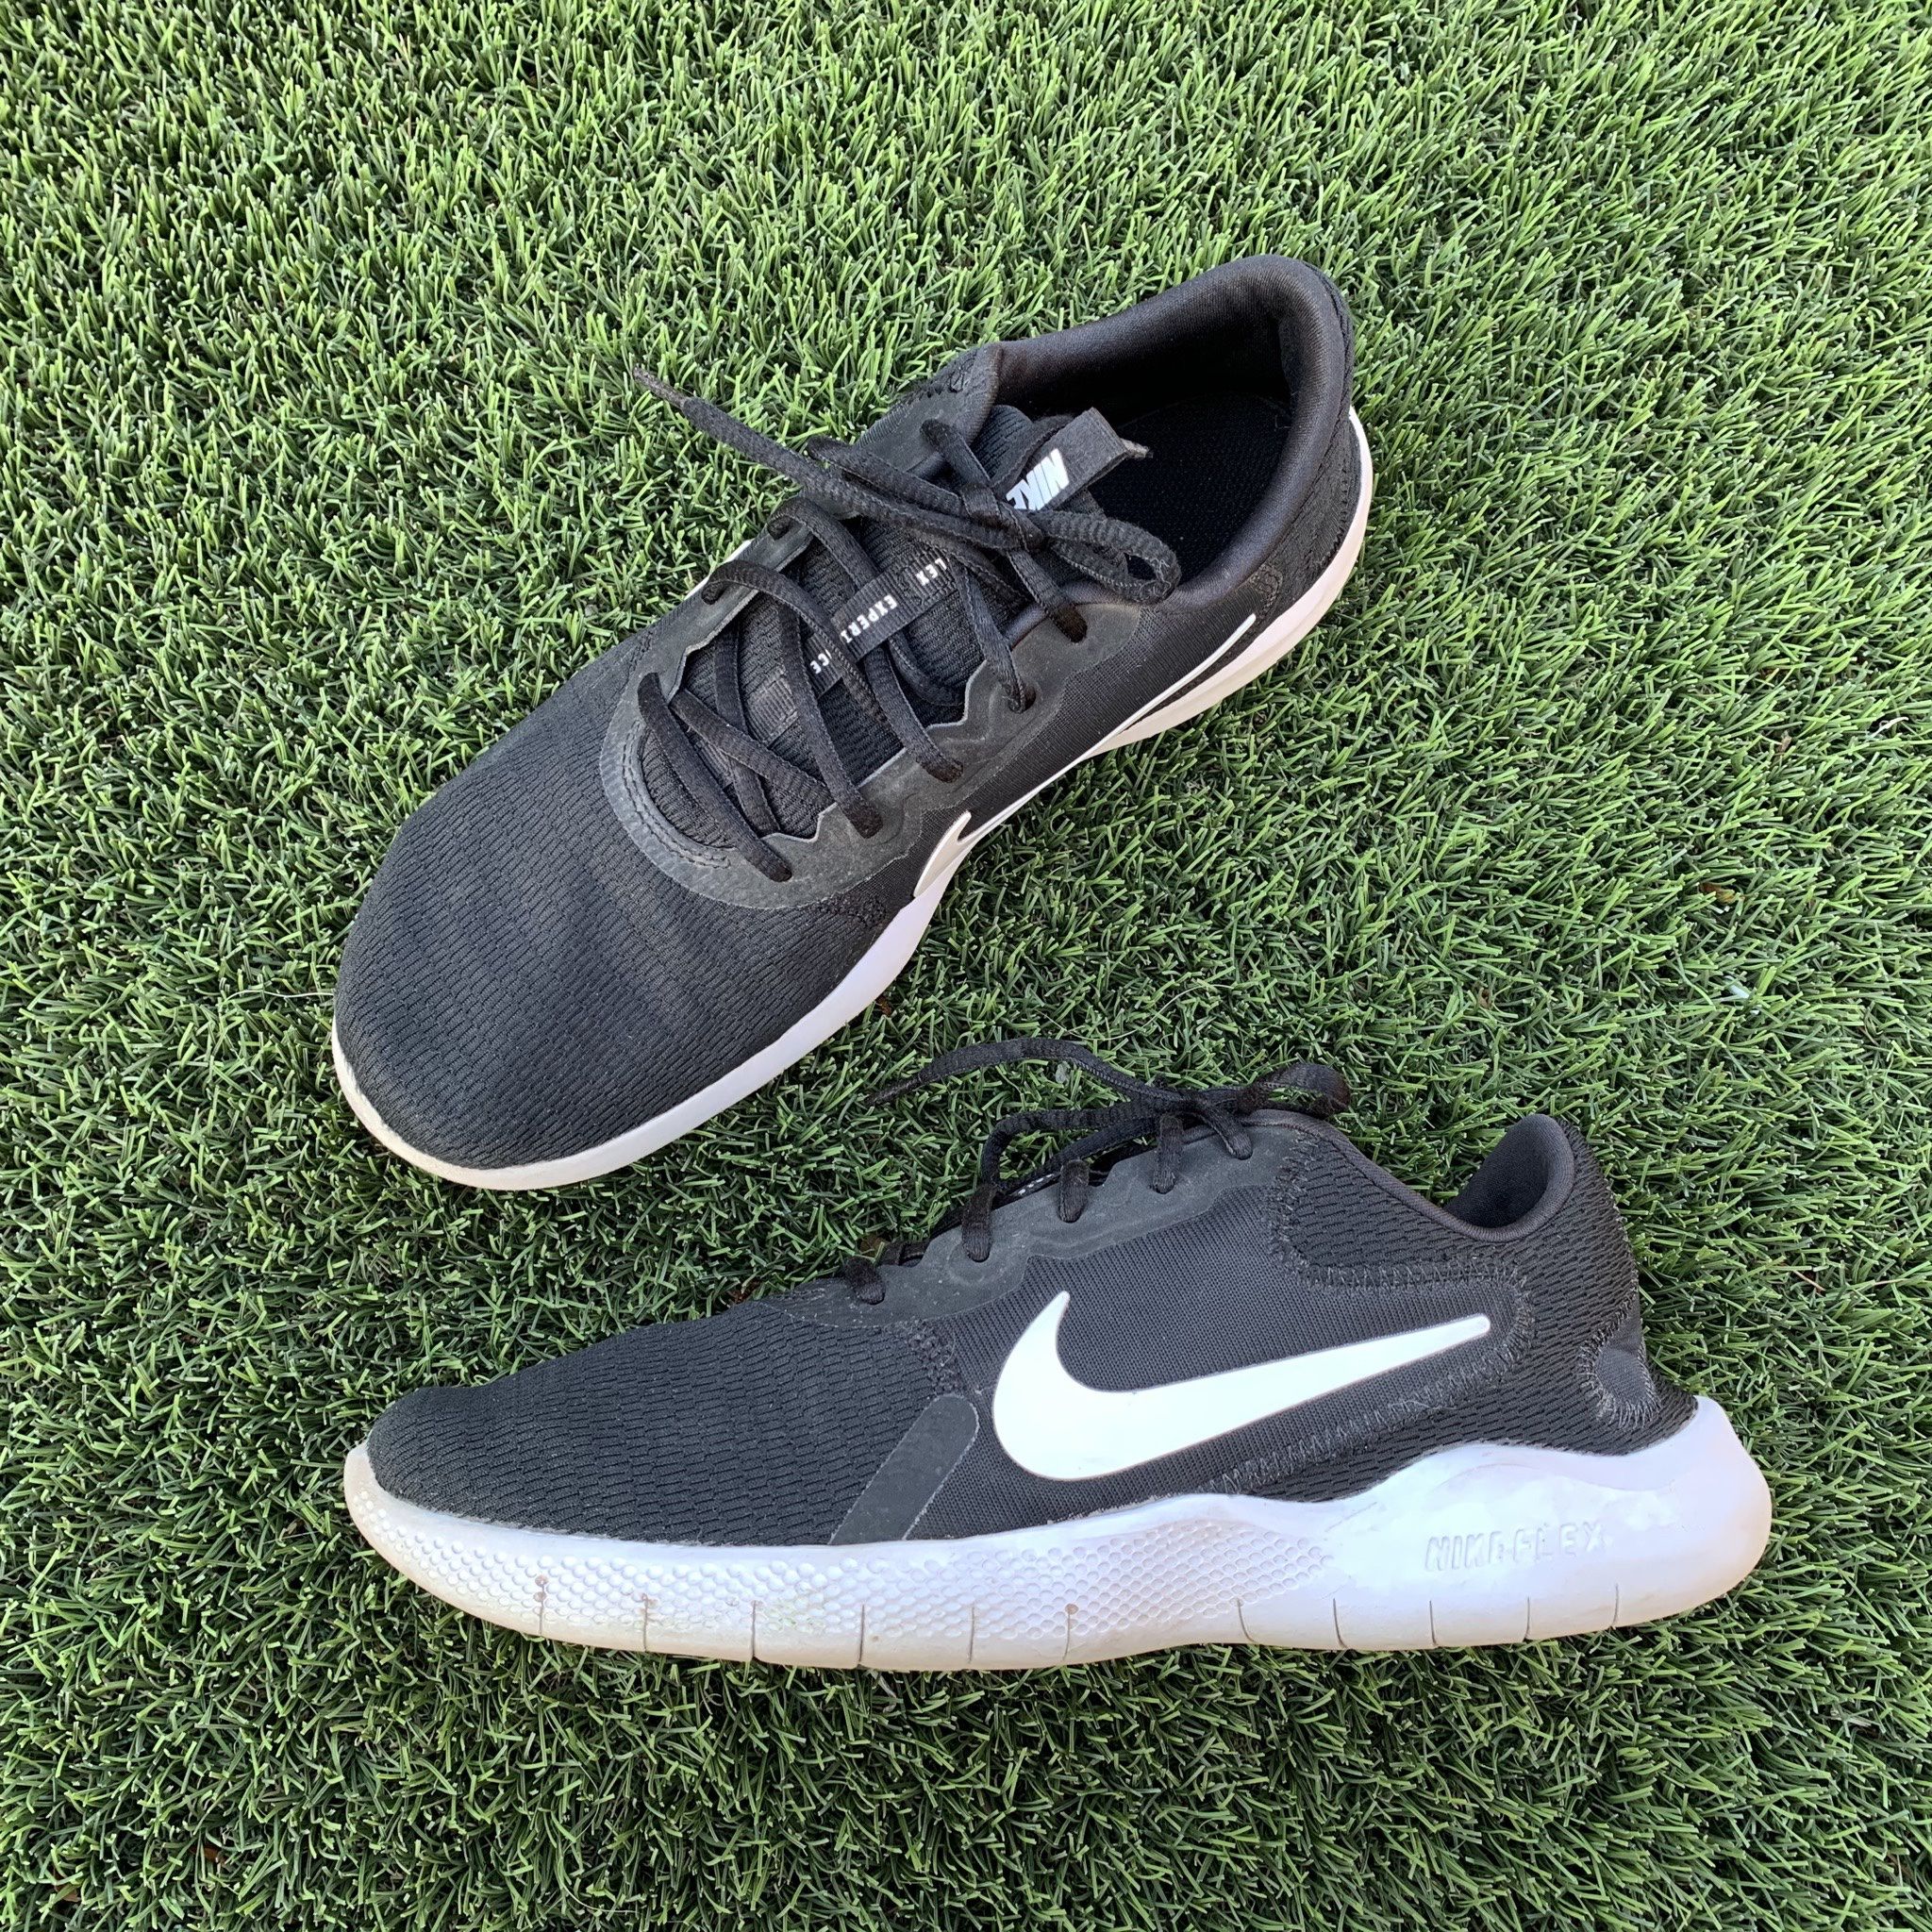 Size 10 - Nike Men's Flex Experience RN 9 Sneakers Shoes Black 2019 - CD0225-001. for in Gilbert, AZ - OfferUp